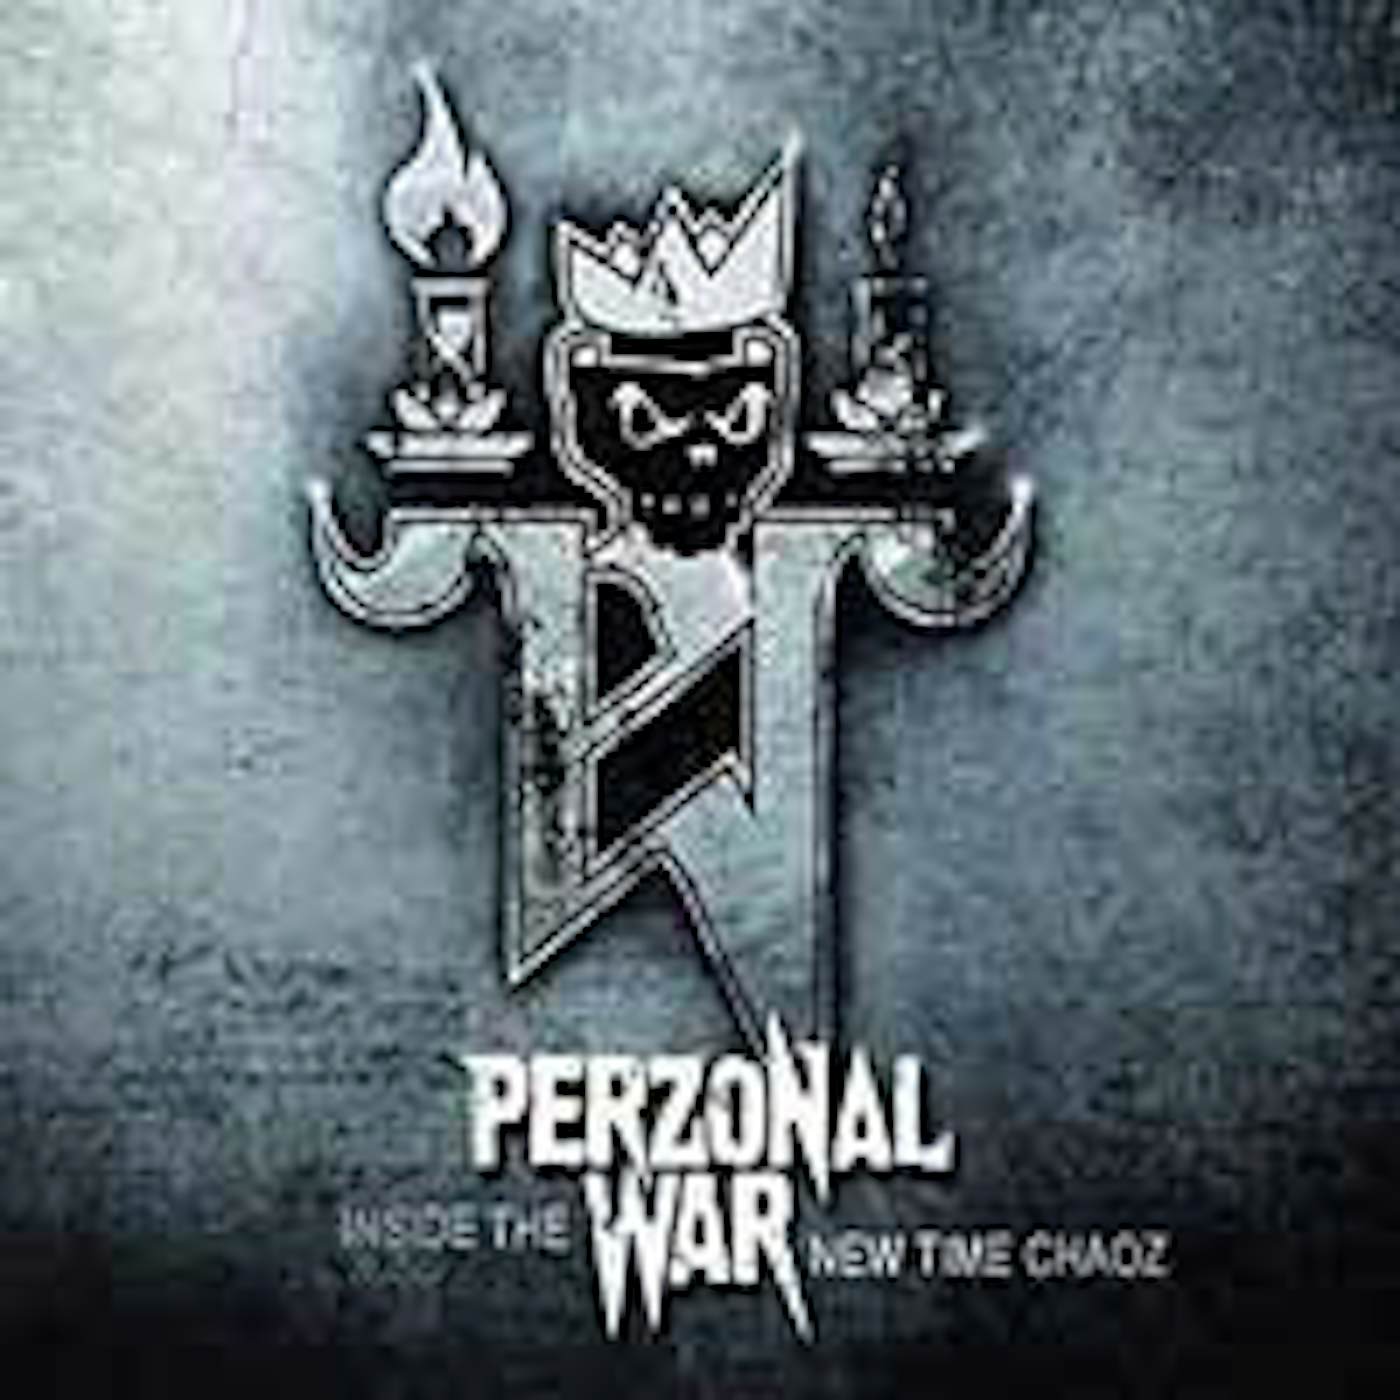 Perzonal War LP - Inside The New Time Chaoz (Vinyl)